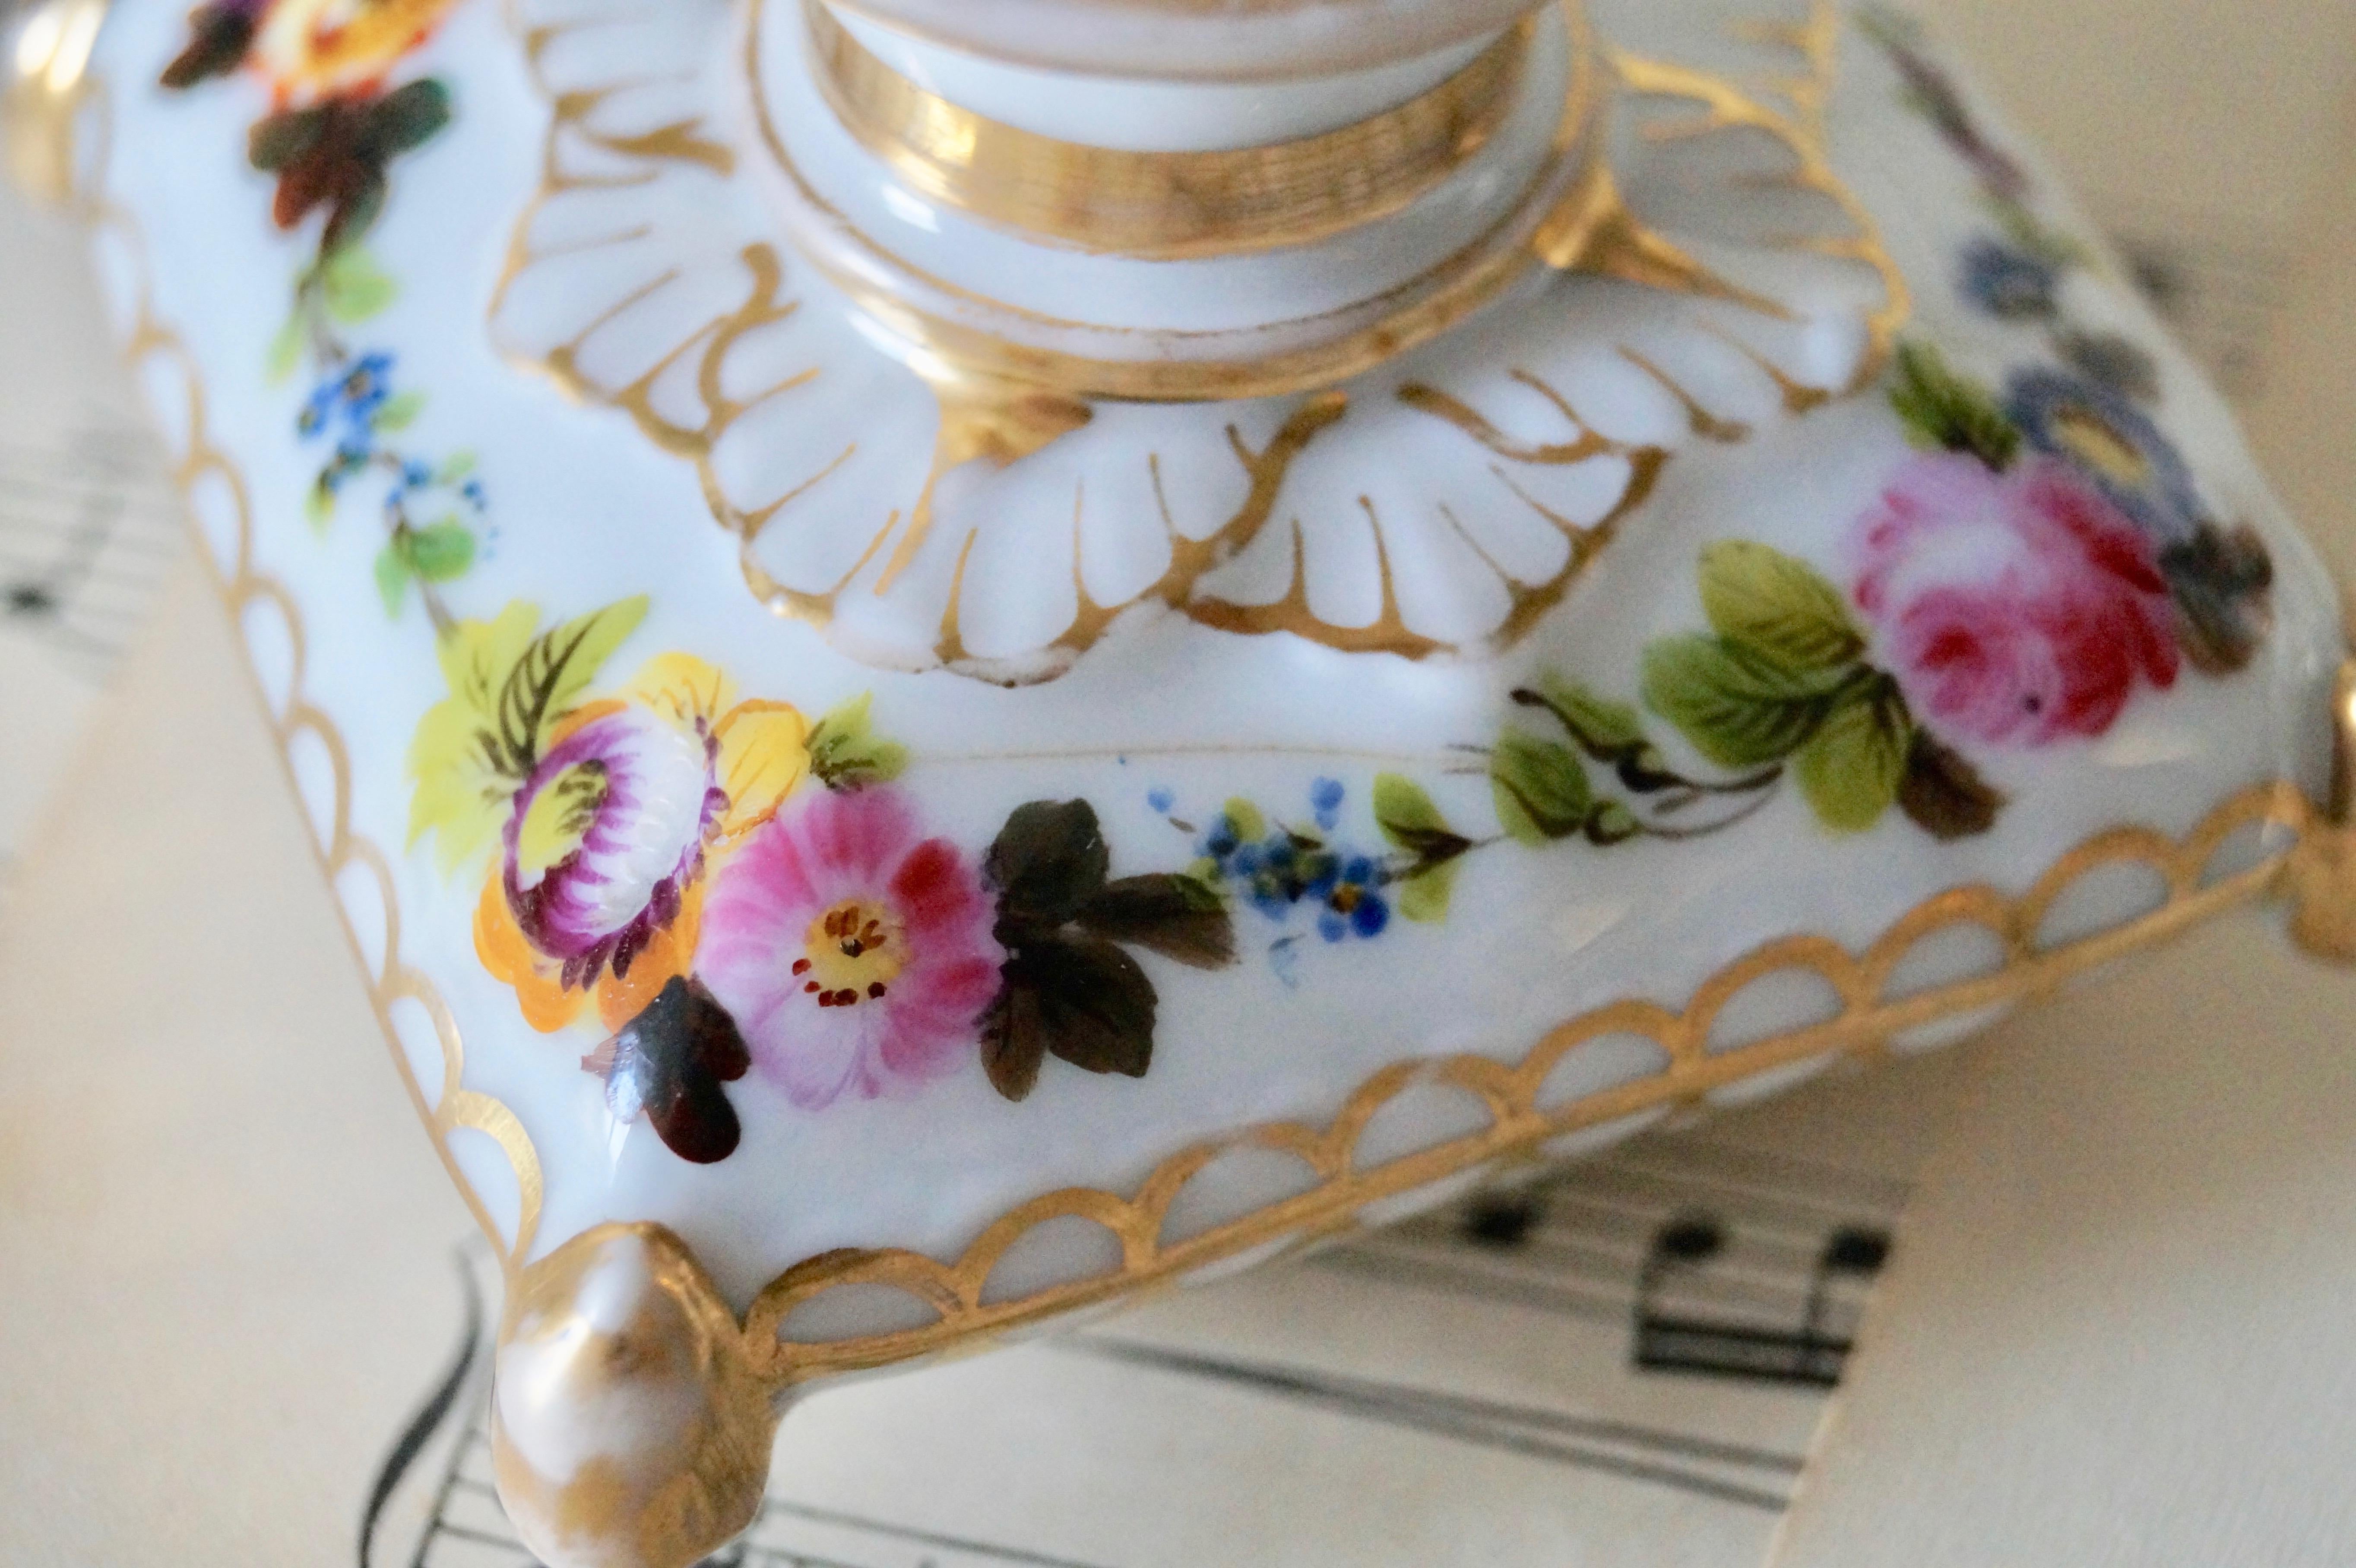 Beautiful set of 2 rare antique Old Paris Porcelain perfume bottles

In the form of a square cushion. hand painted with a garland of flowers and decorated with gold decorations.

Good condition for its age. 1 bottle has a crack line, see photo